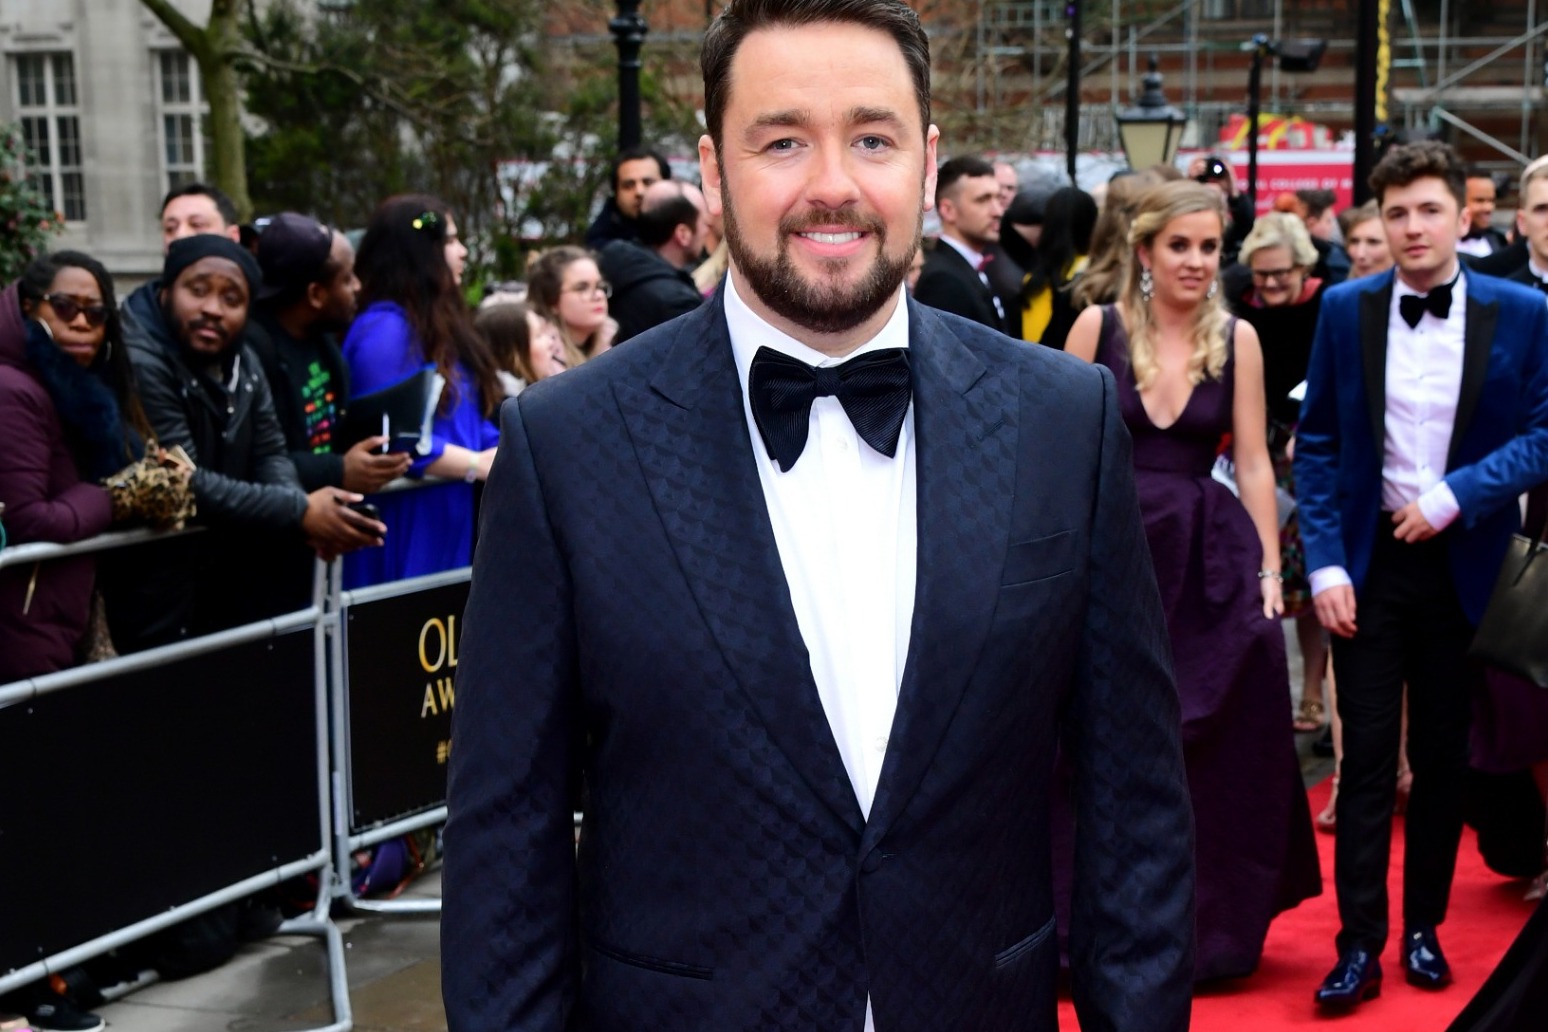 Government’s approach to food banks is ‘a mess’ – Jason Manford 